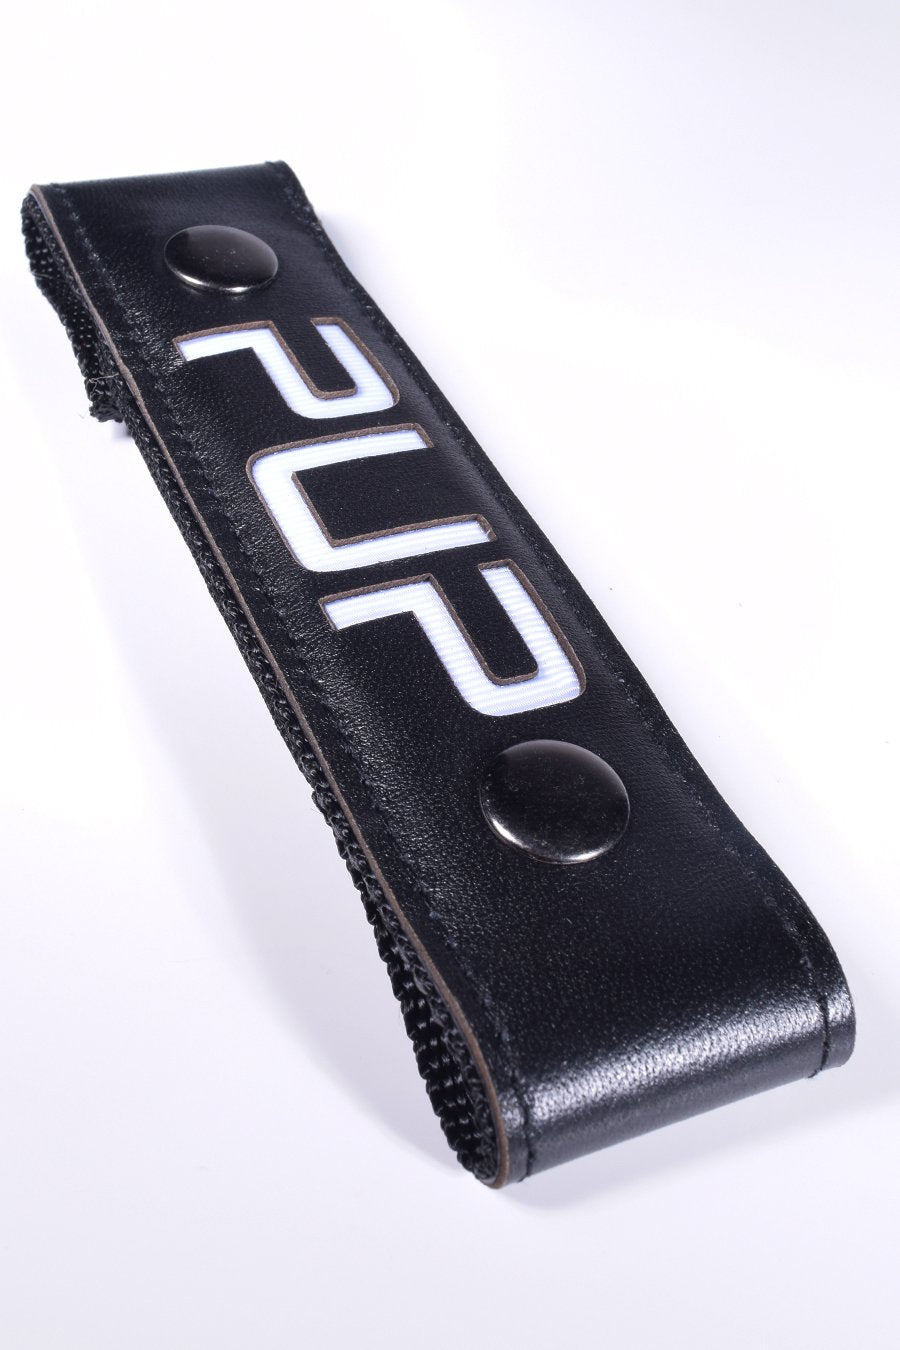 Glow Center Strap, "PUP".